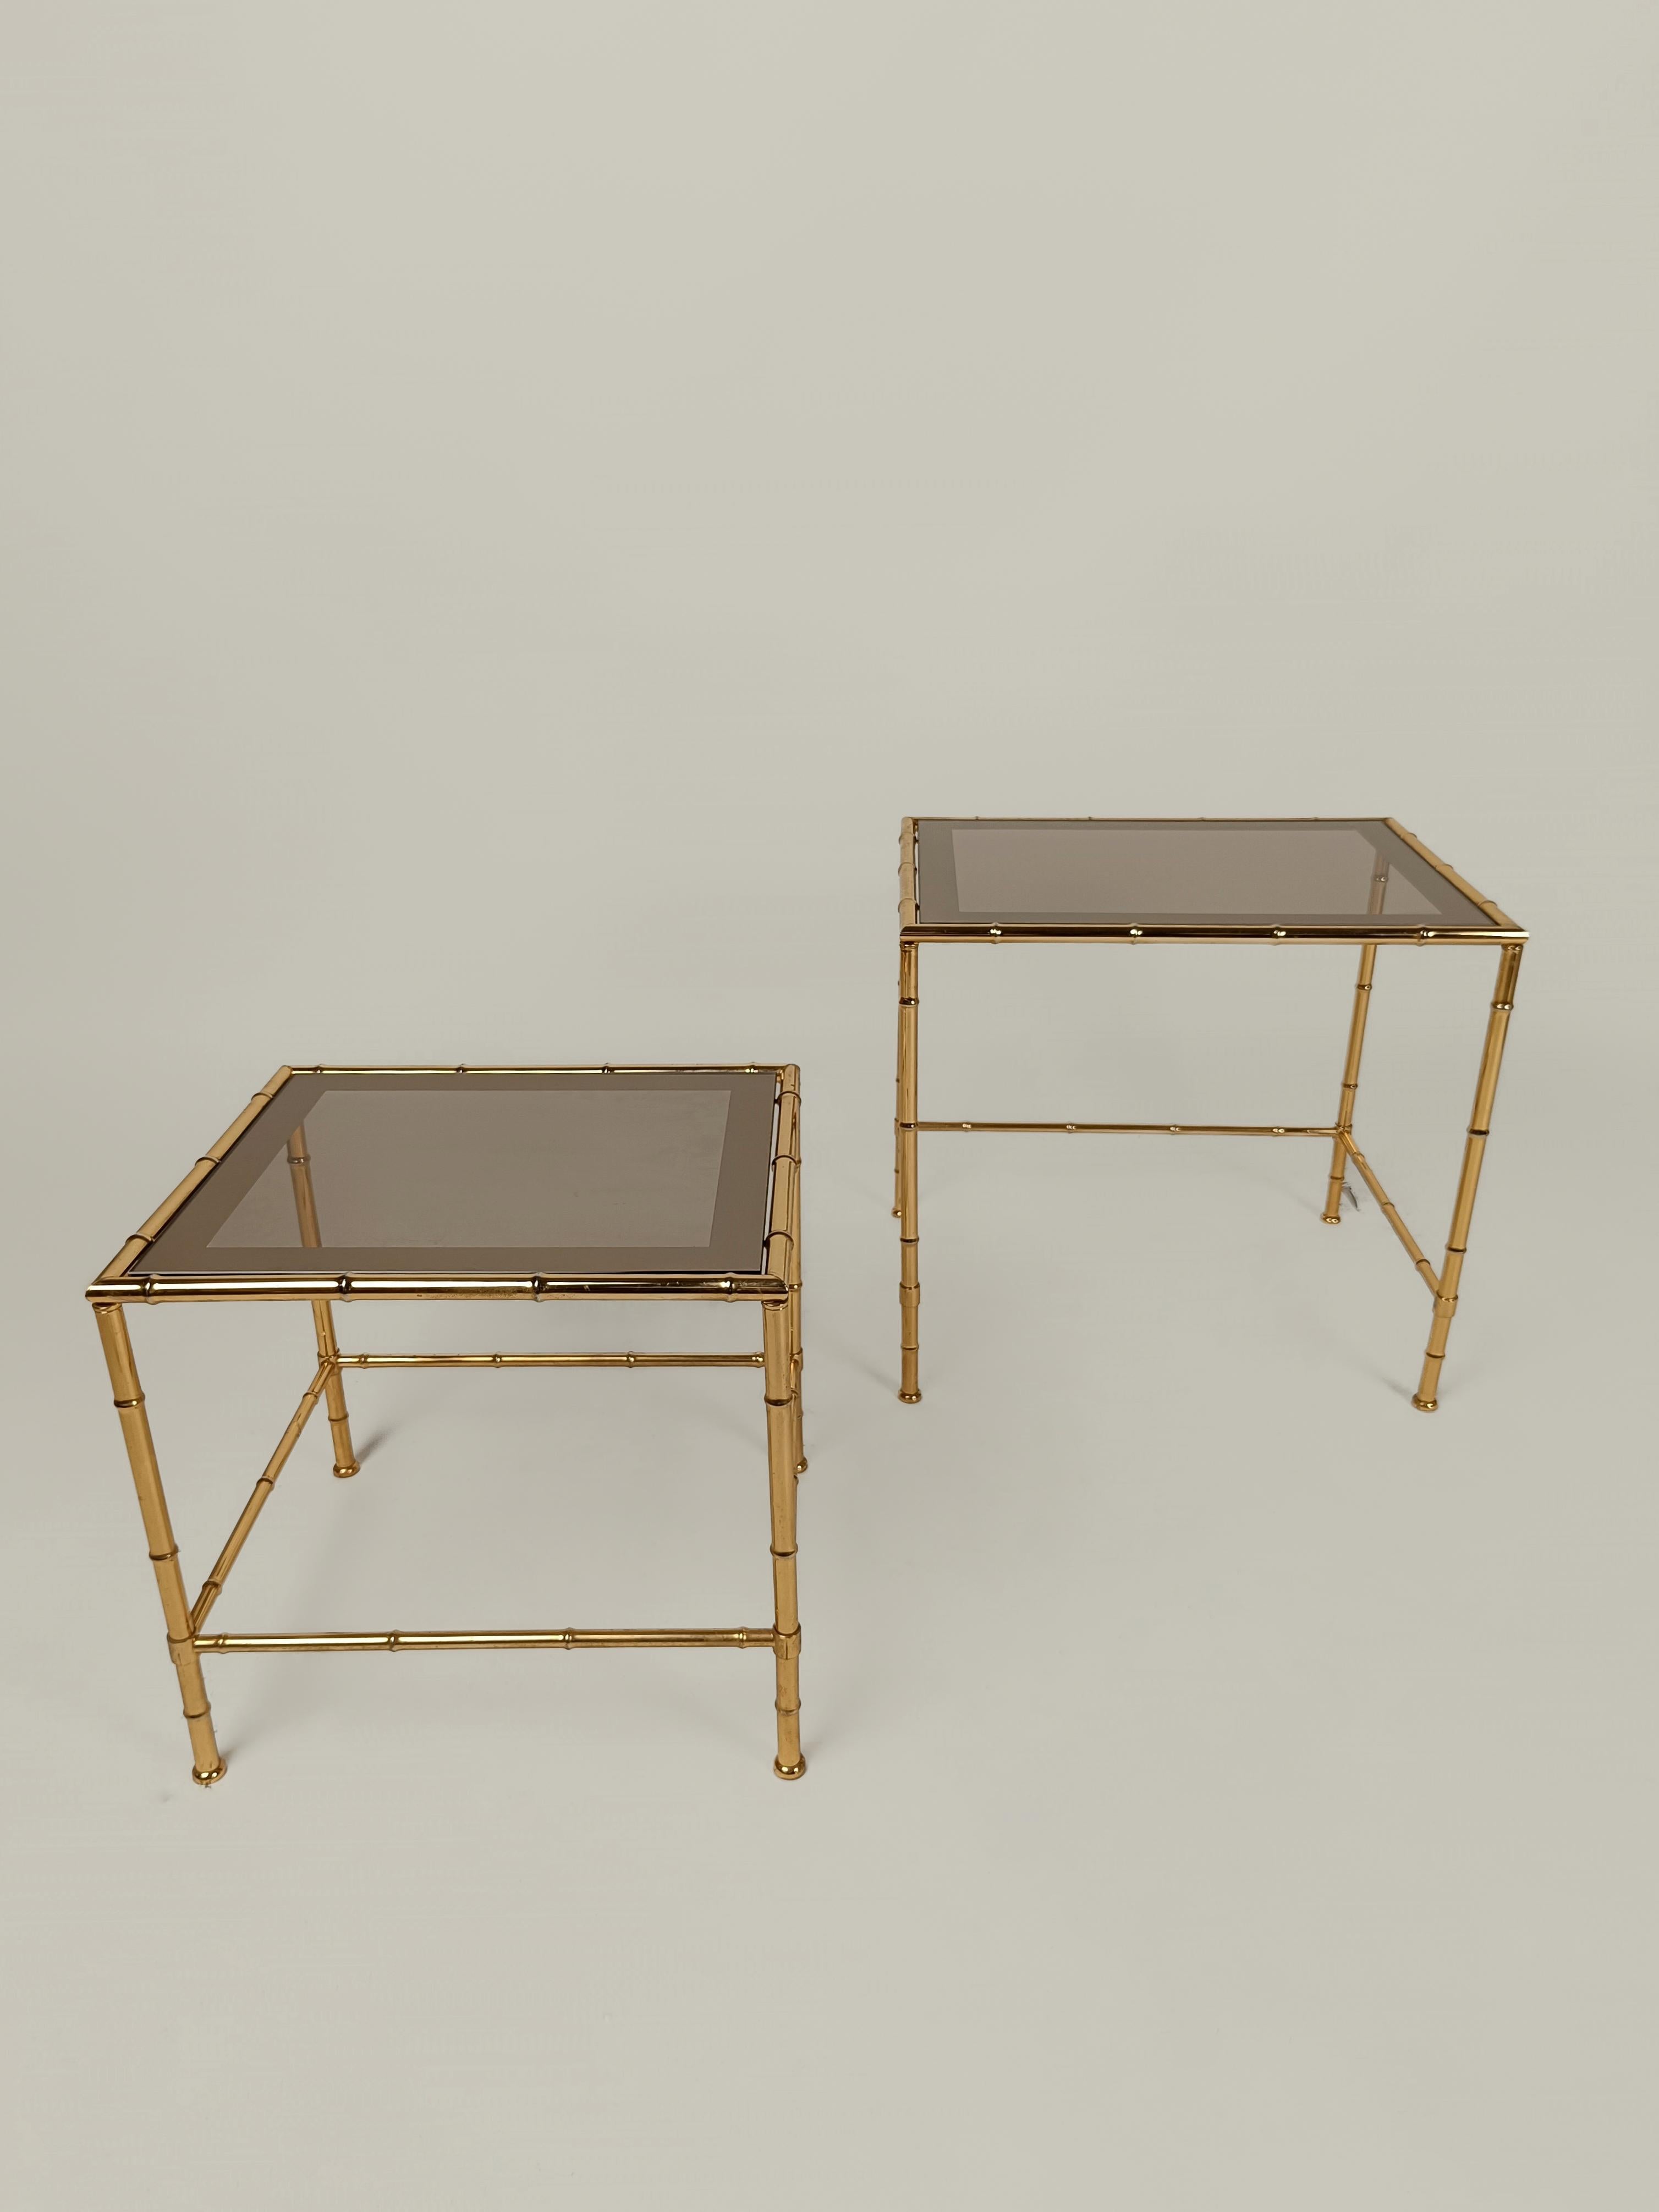 Italiano Midcentury Nesting Table in Brass Faux Bamboo and Fumè Mirrored Glass For Sale 3